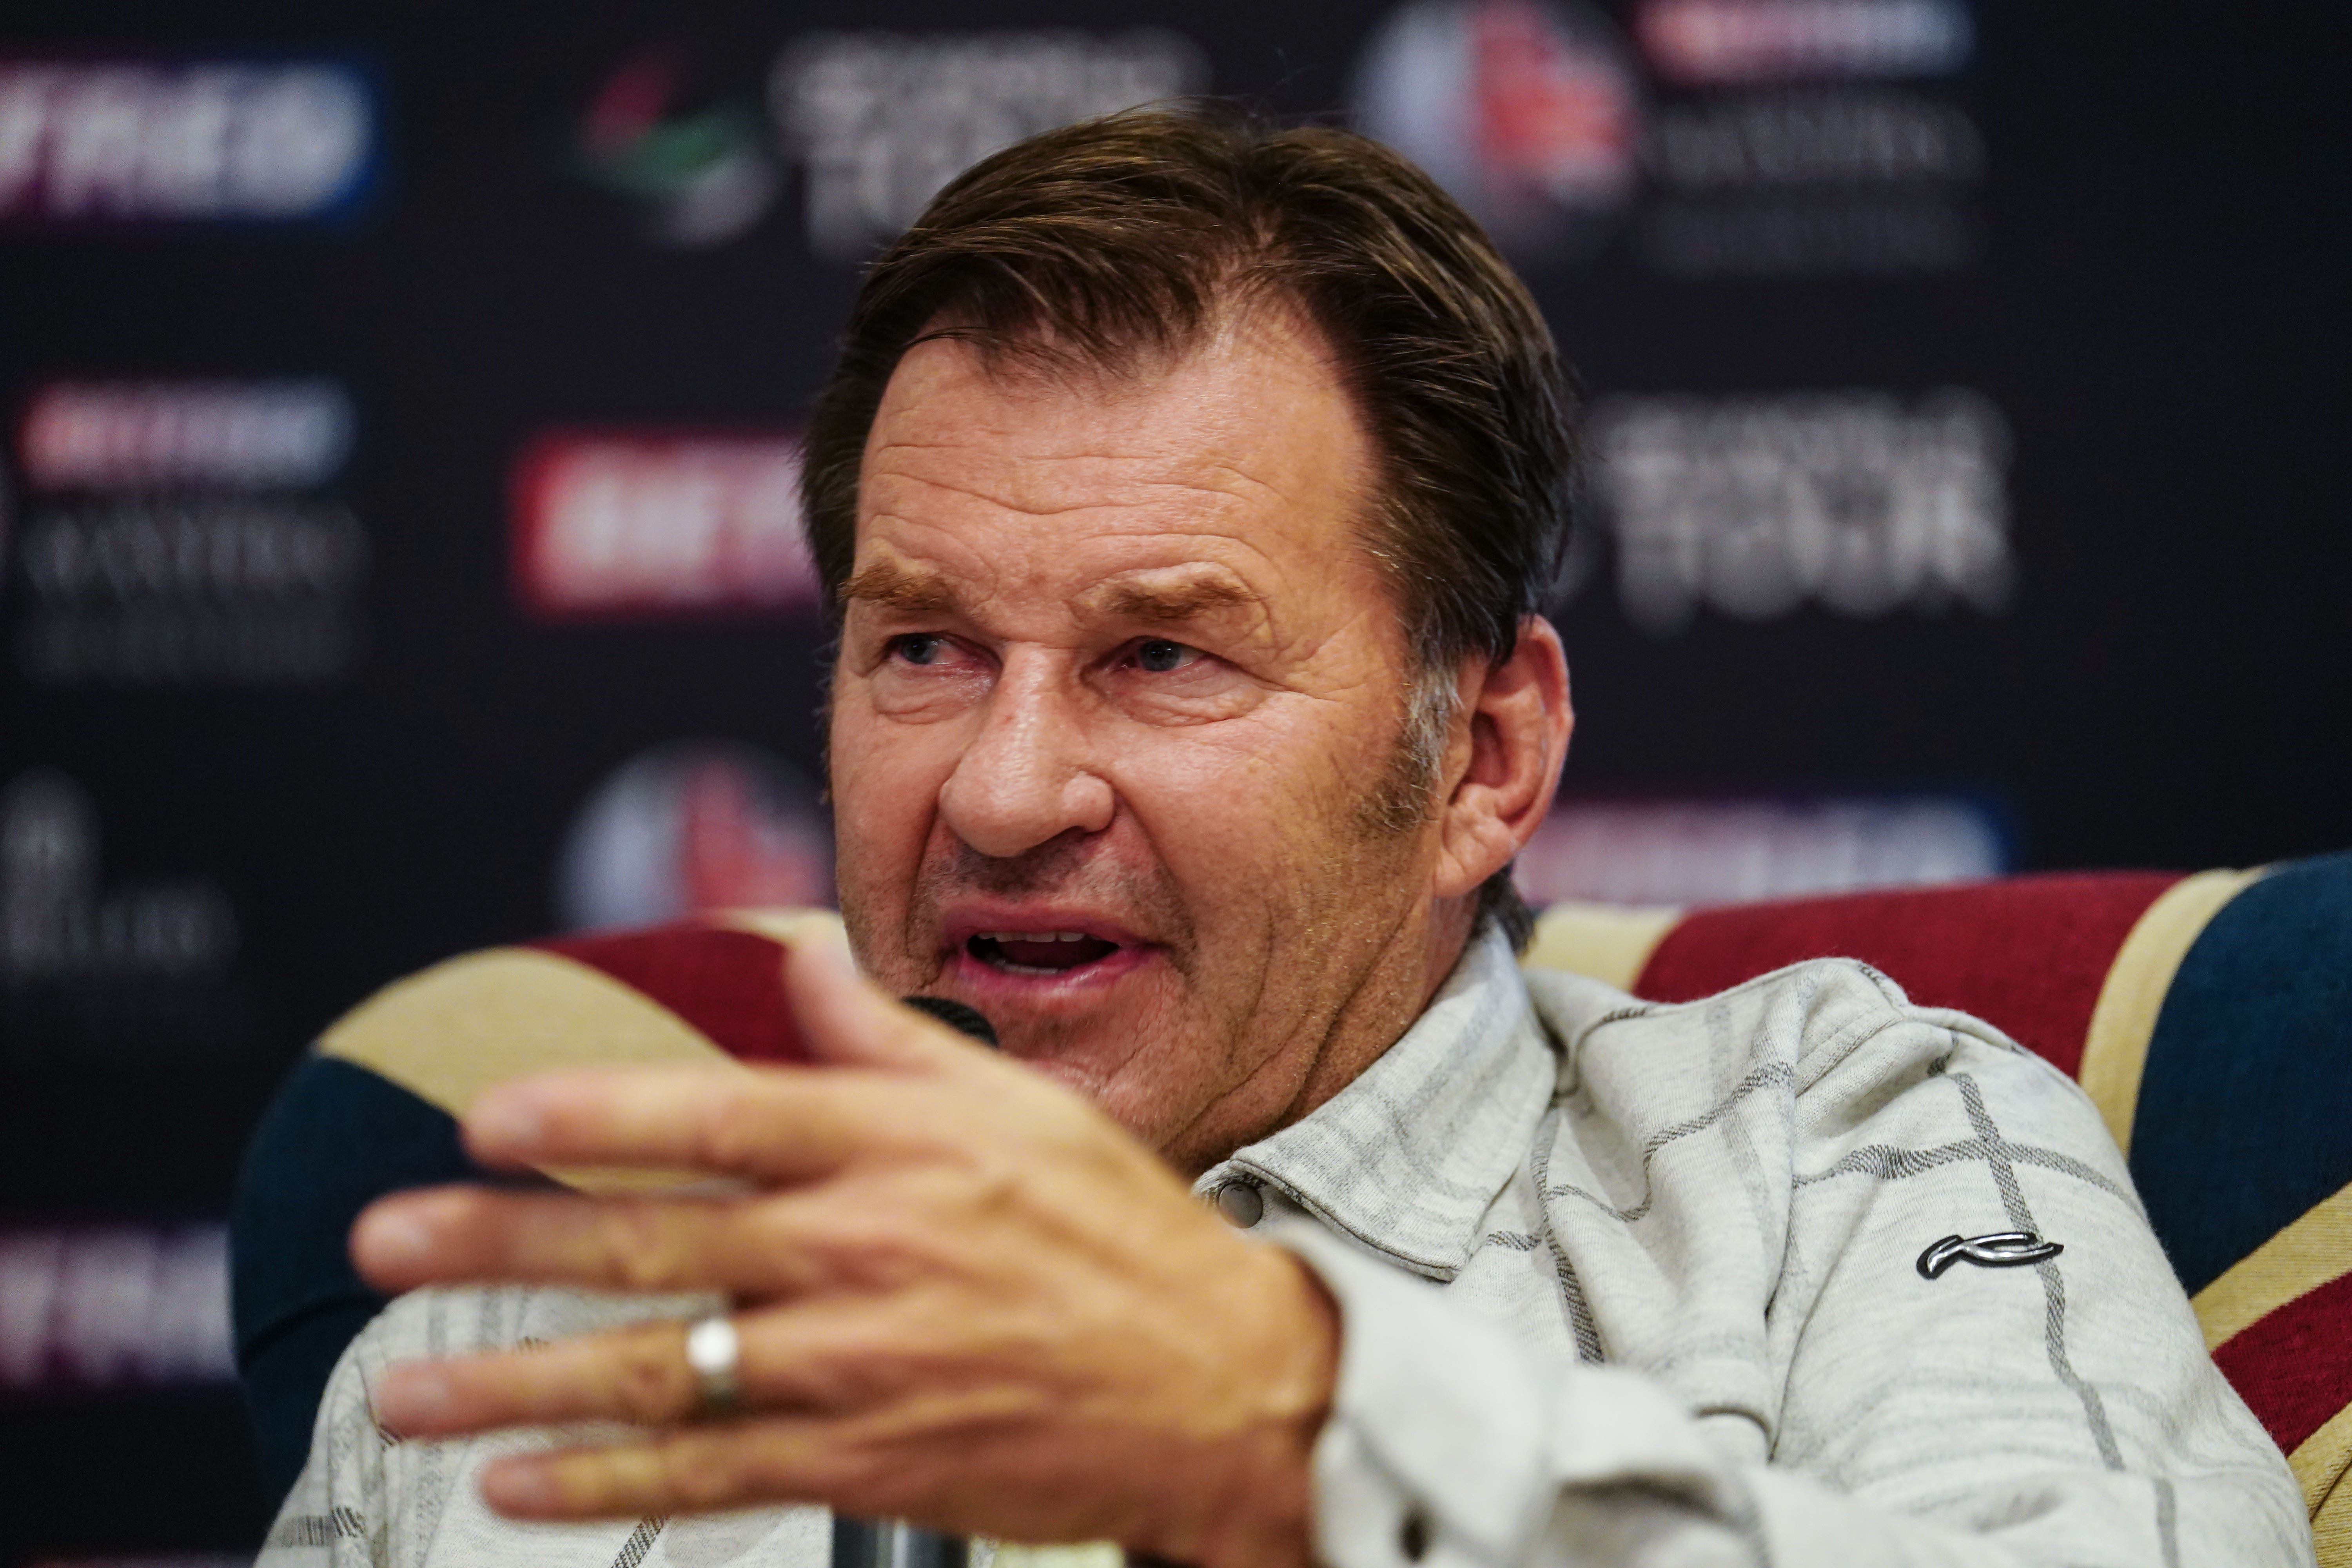 Sir Nick Faldo LIV Golf wont survive proposed deal with governing bodies The Independent